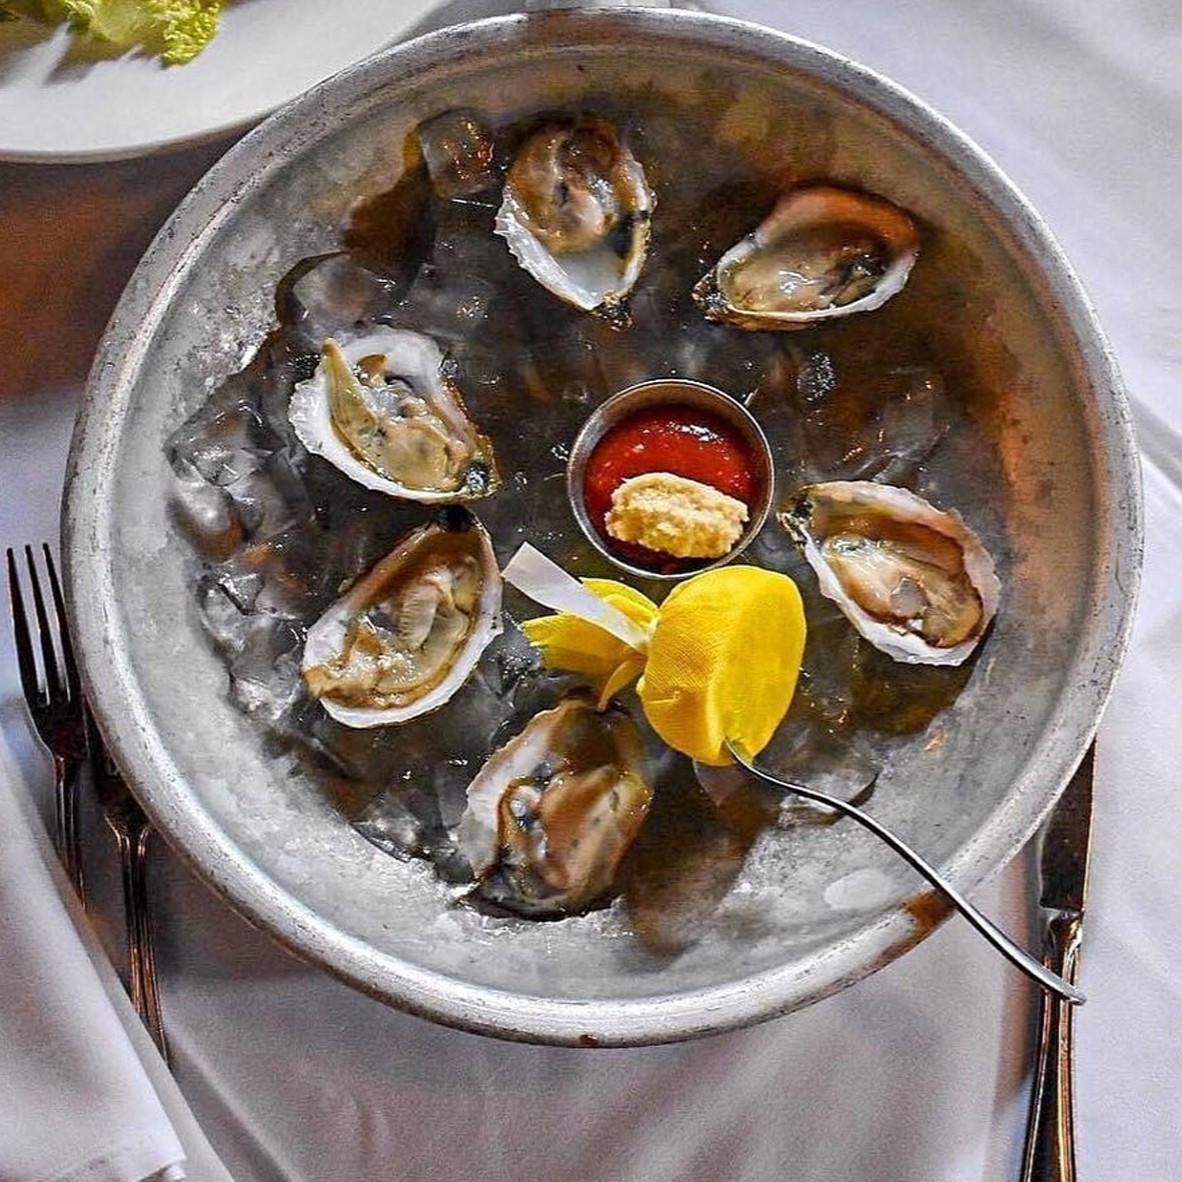 Take a dive into the briny depths with our Ostriche al Limone! These shucked beauties are a seafood lover's dream. 🦪
 #supportlocalbusiness #foodandwine #virginiafoodies #visitalx #zagat #saveur #huffposttaste #italiancuisine #onlineordering